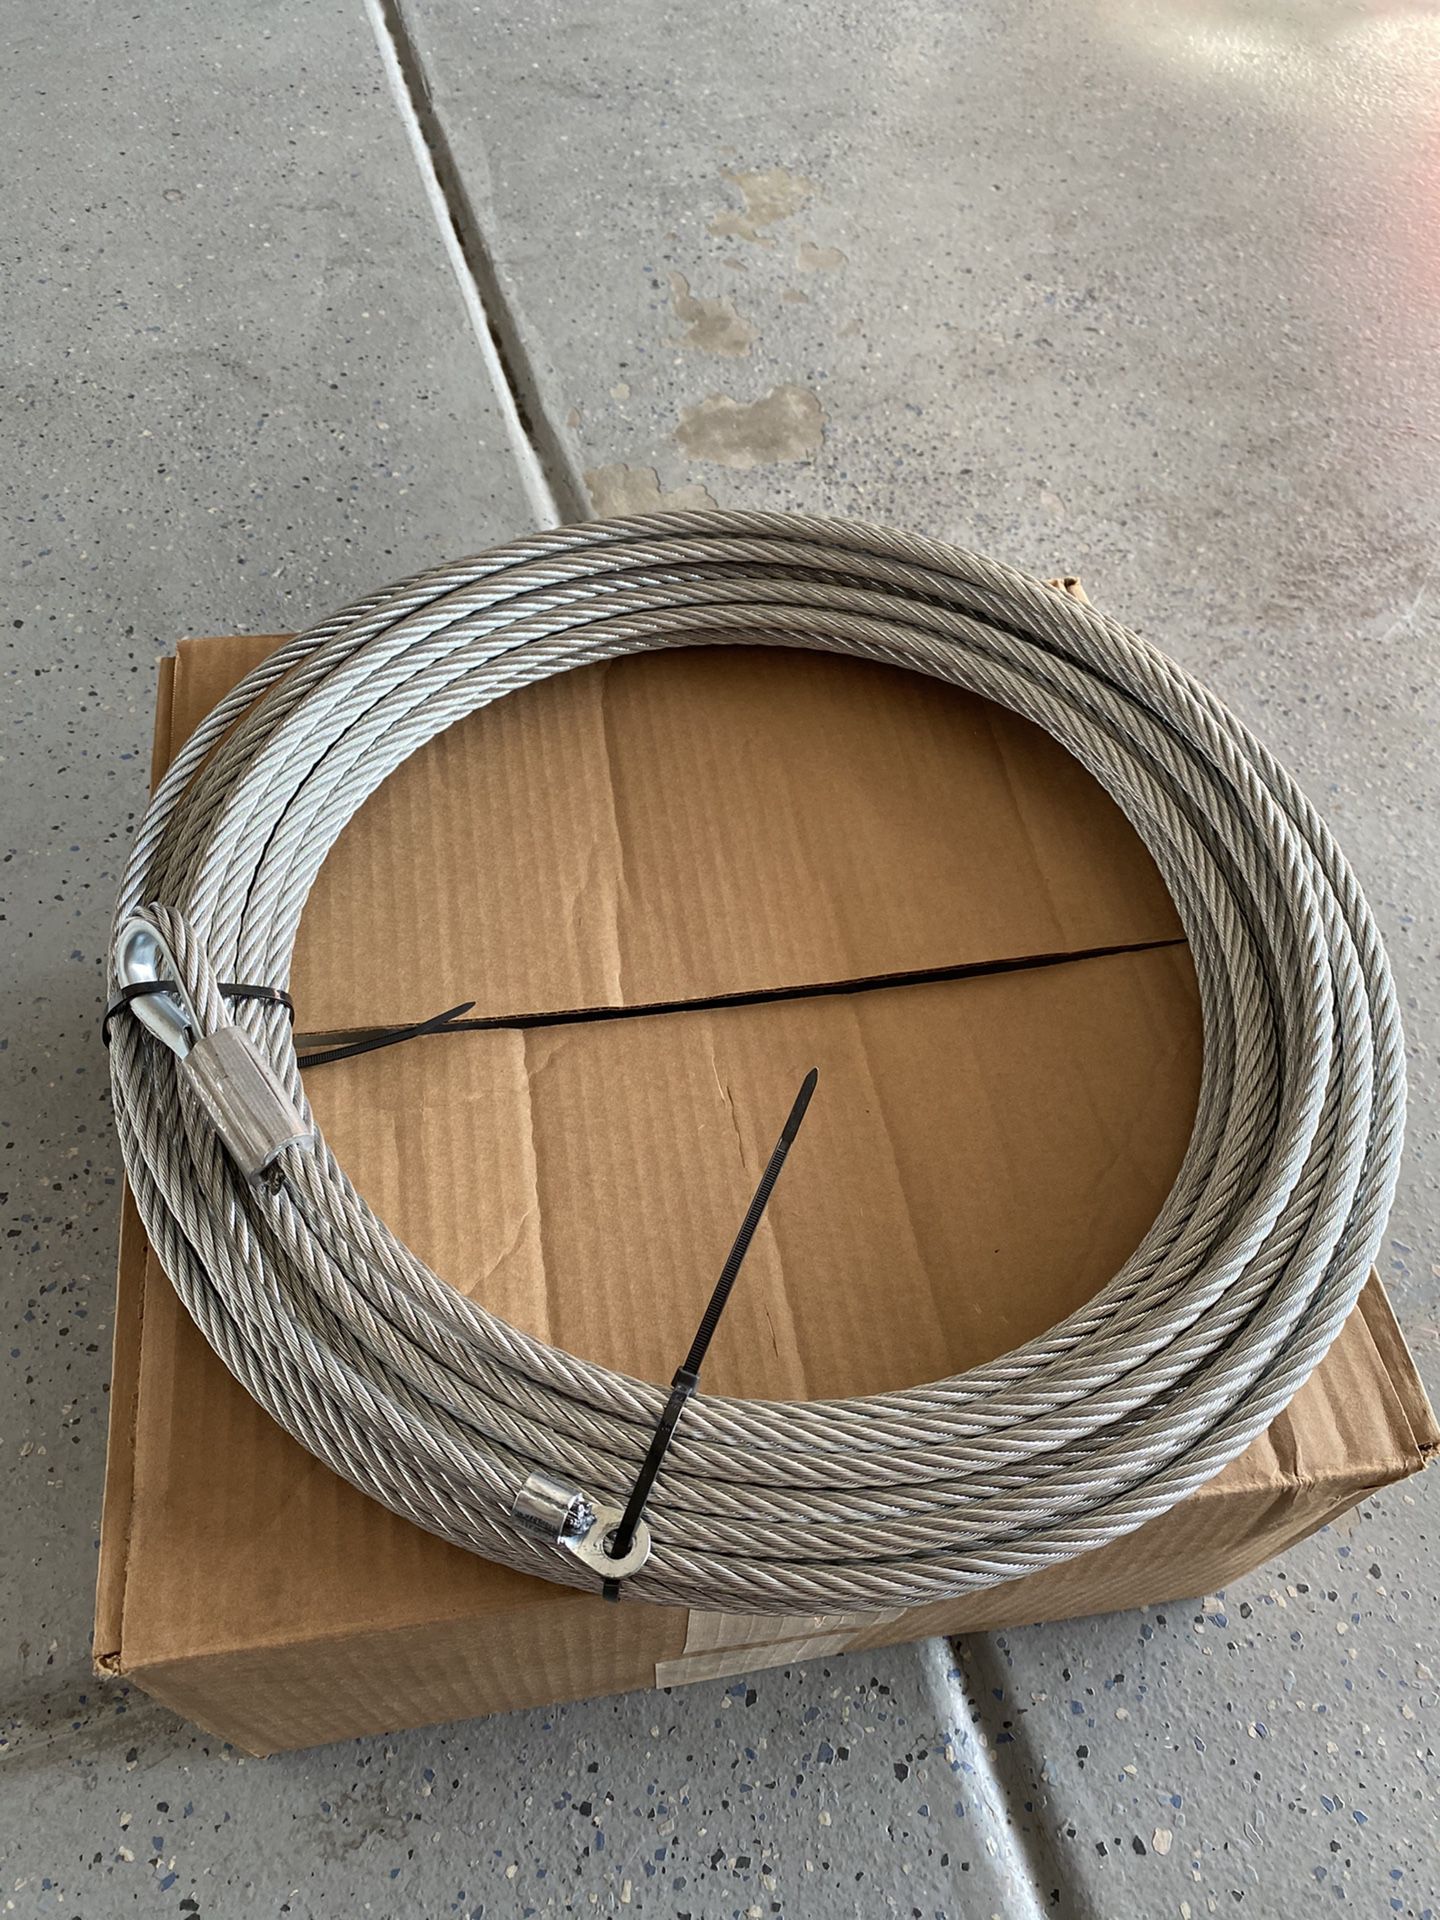 Warn steel cable